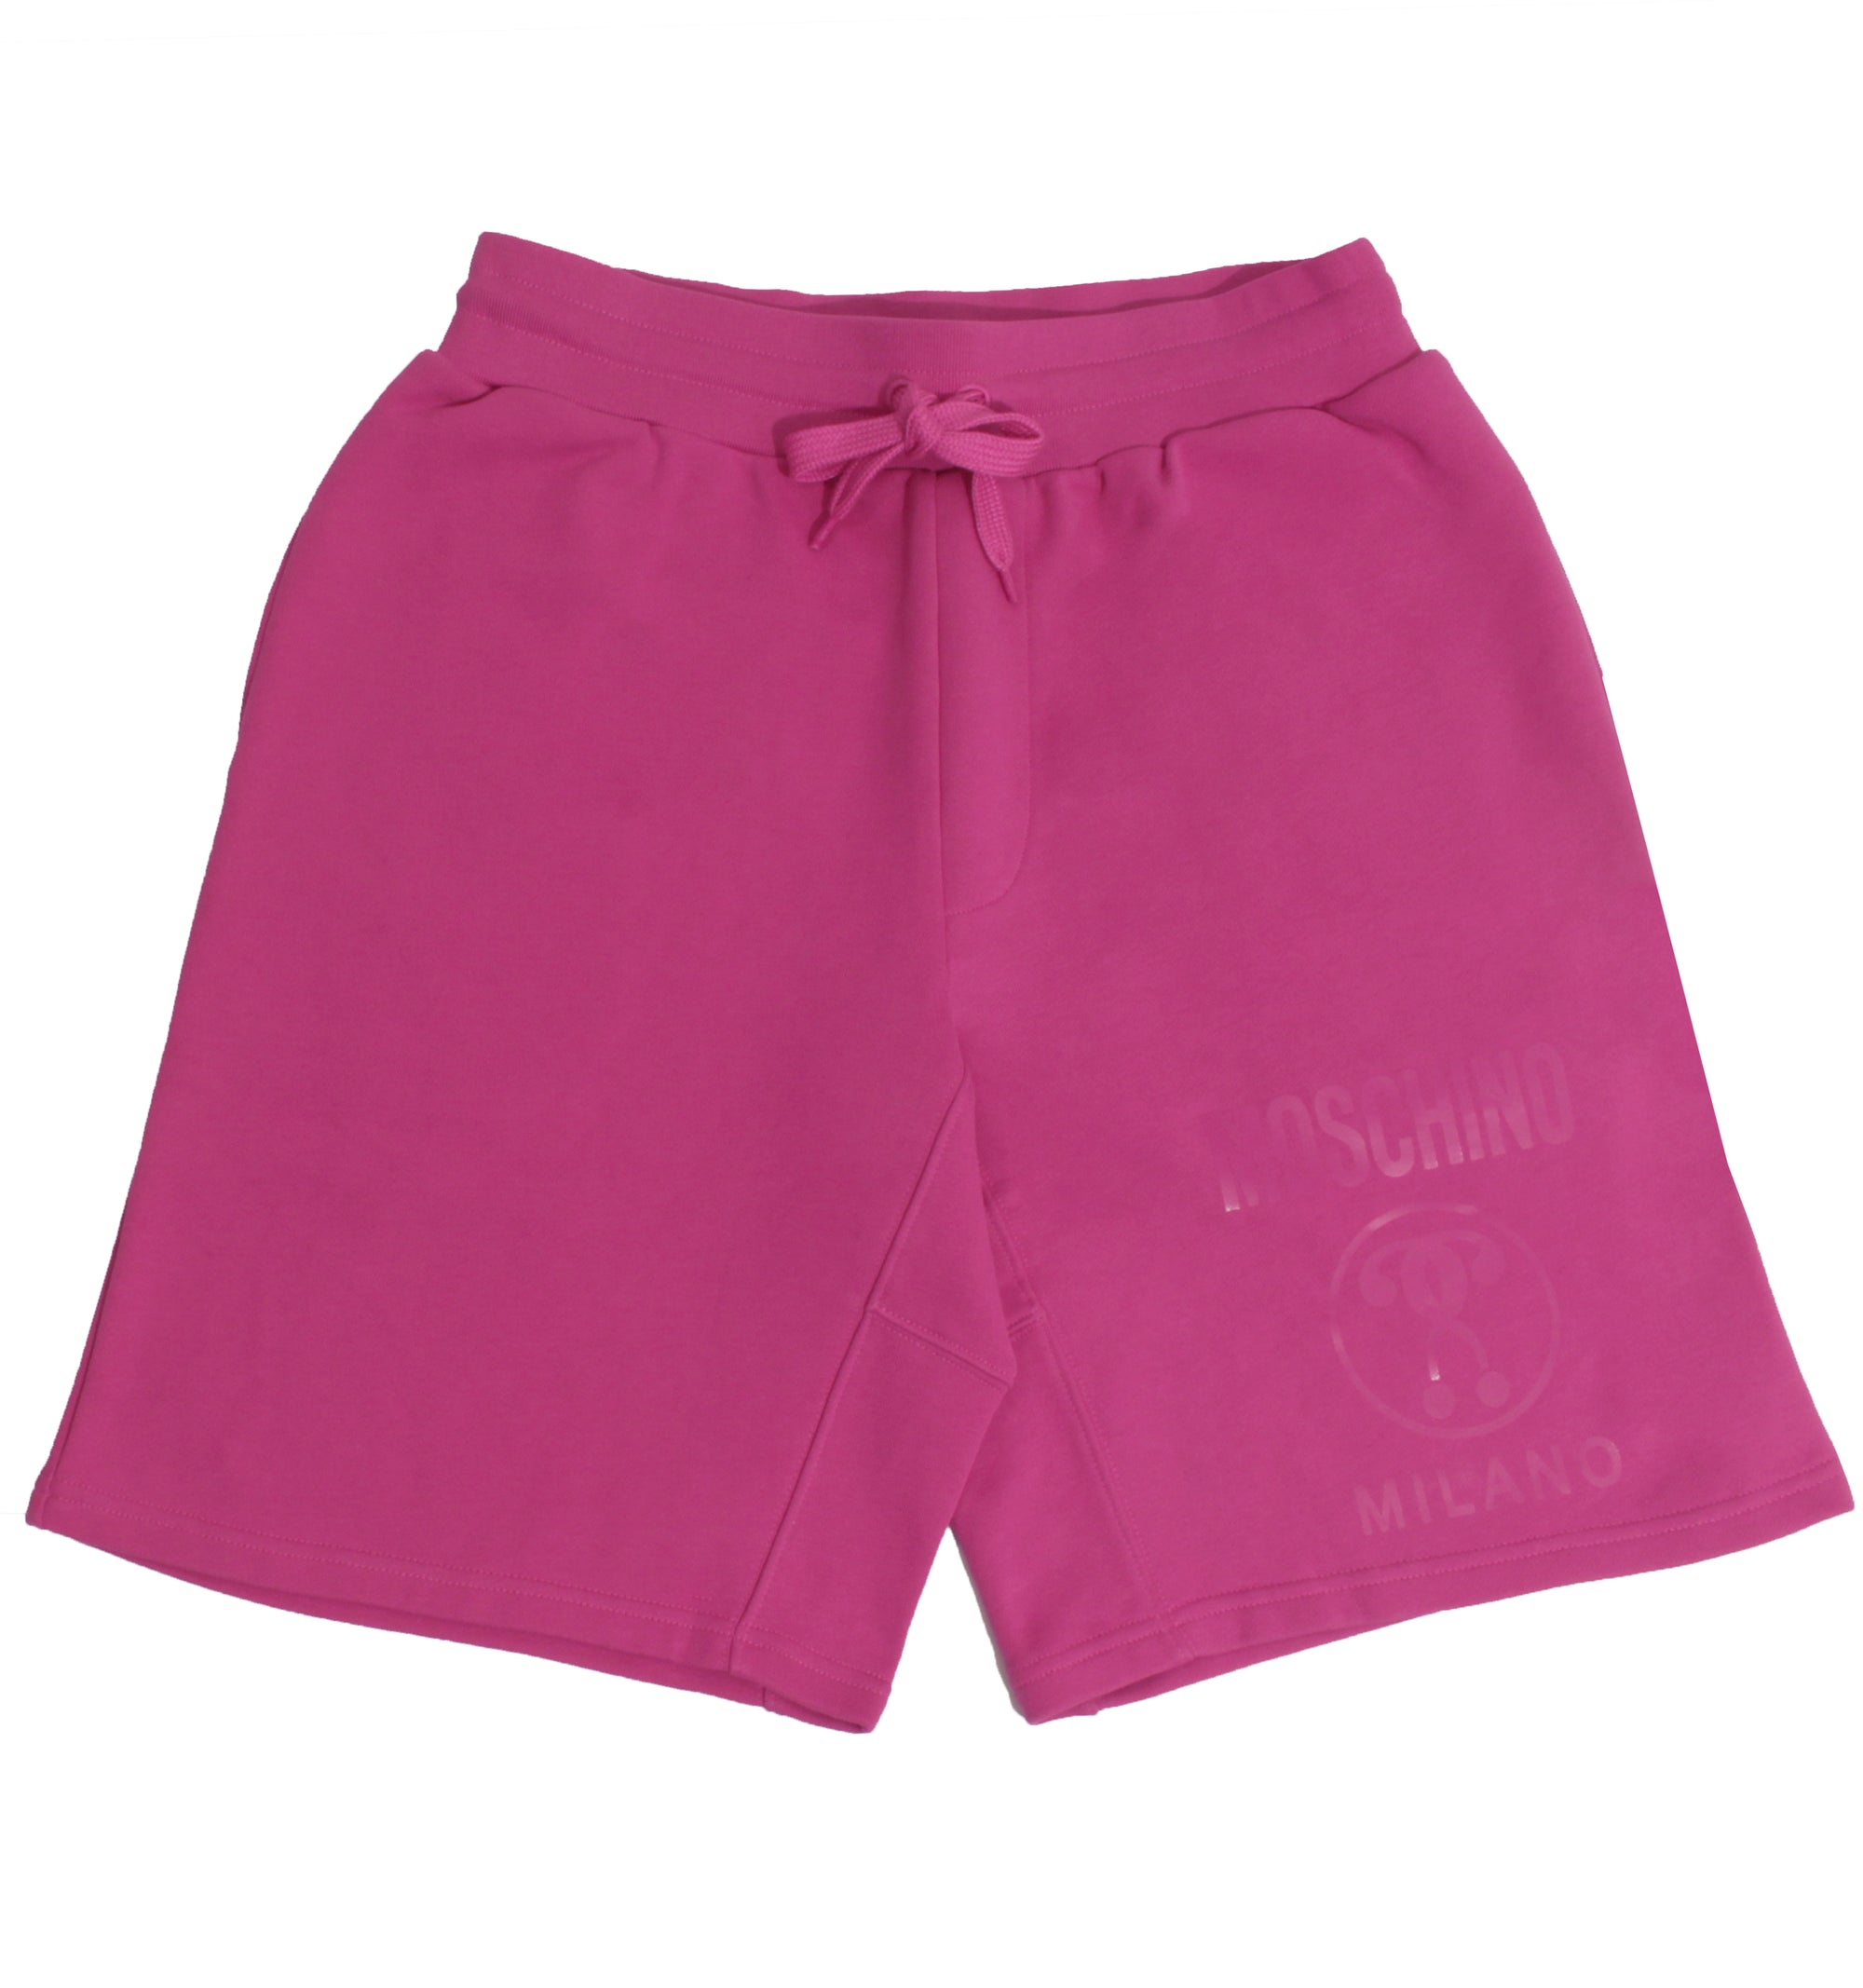 JERSEY T-SHIRT AND SHORTS GIFT SET W/ PATCH DETAIL-PINK